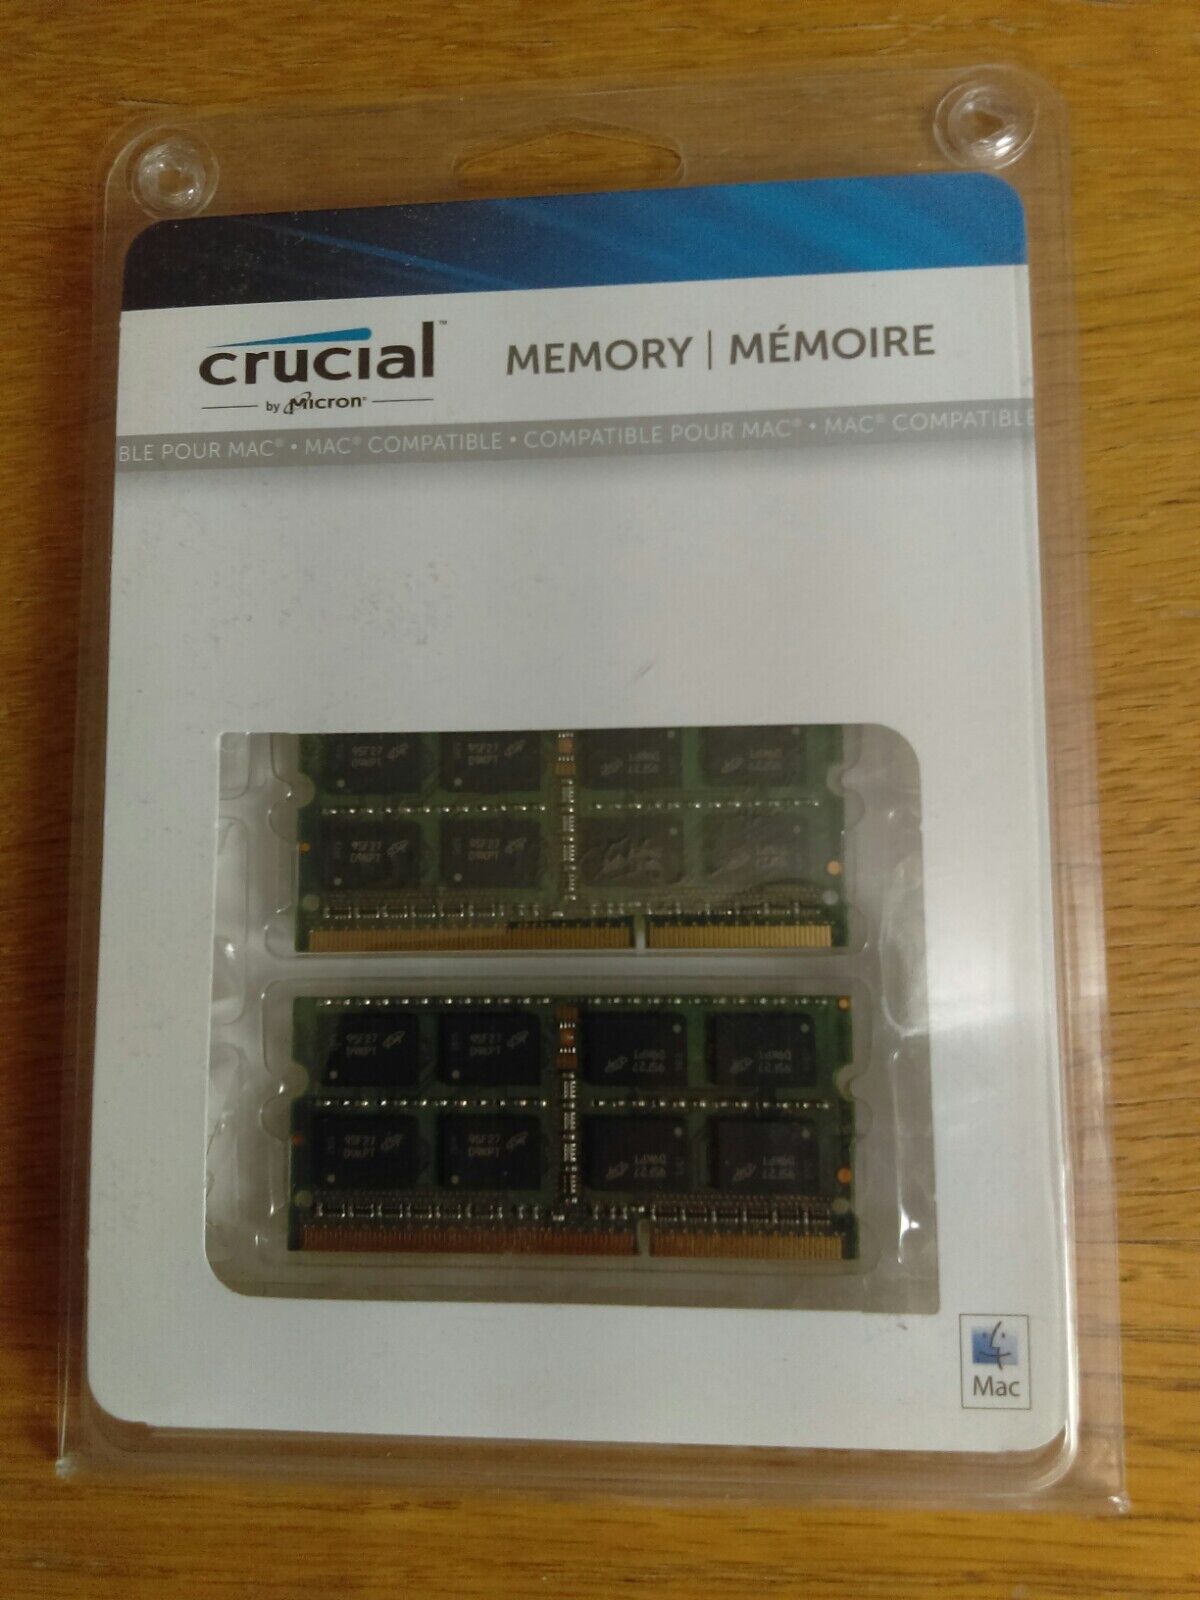 Crucial by Micron Mac Compatible Memory 2 X 2GB CRM-9128